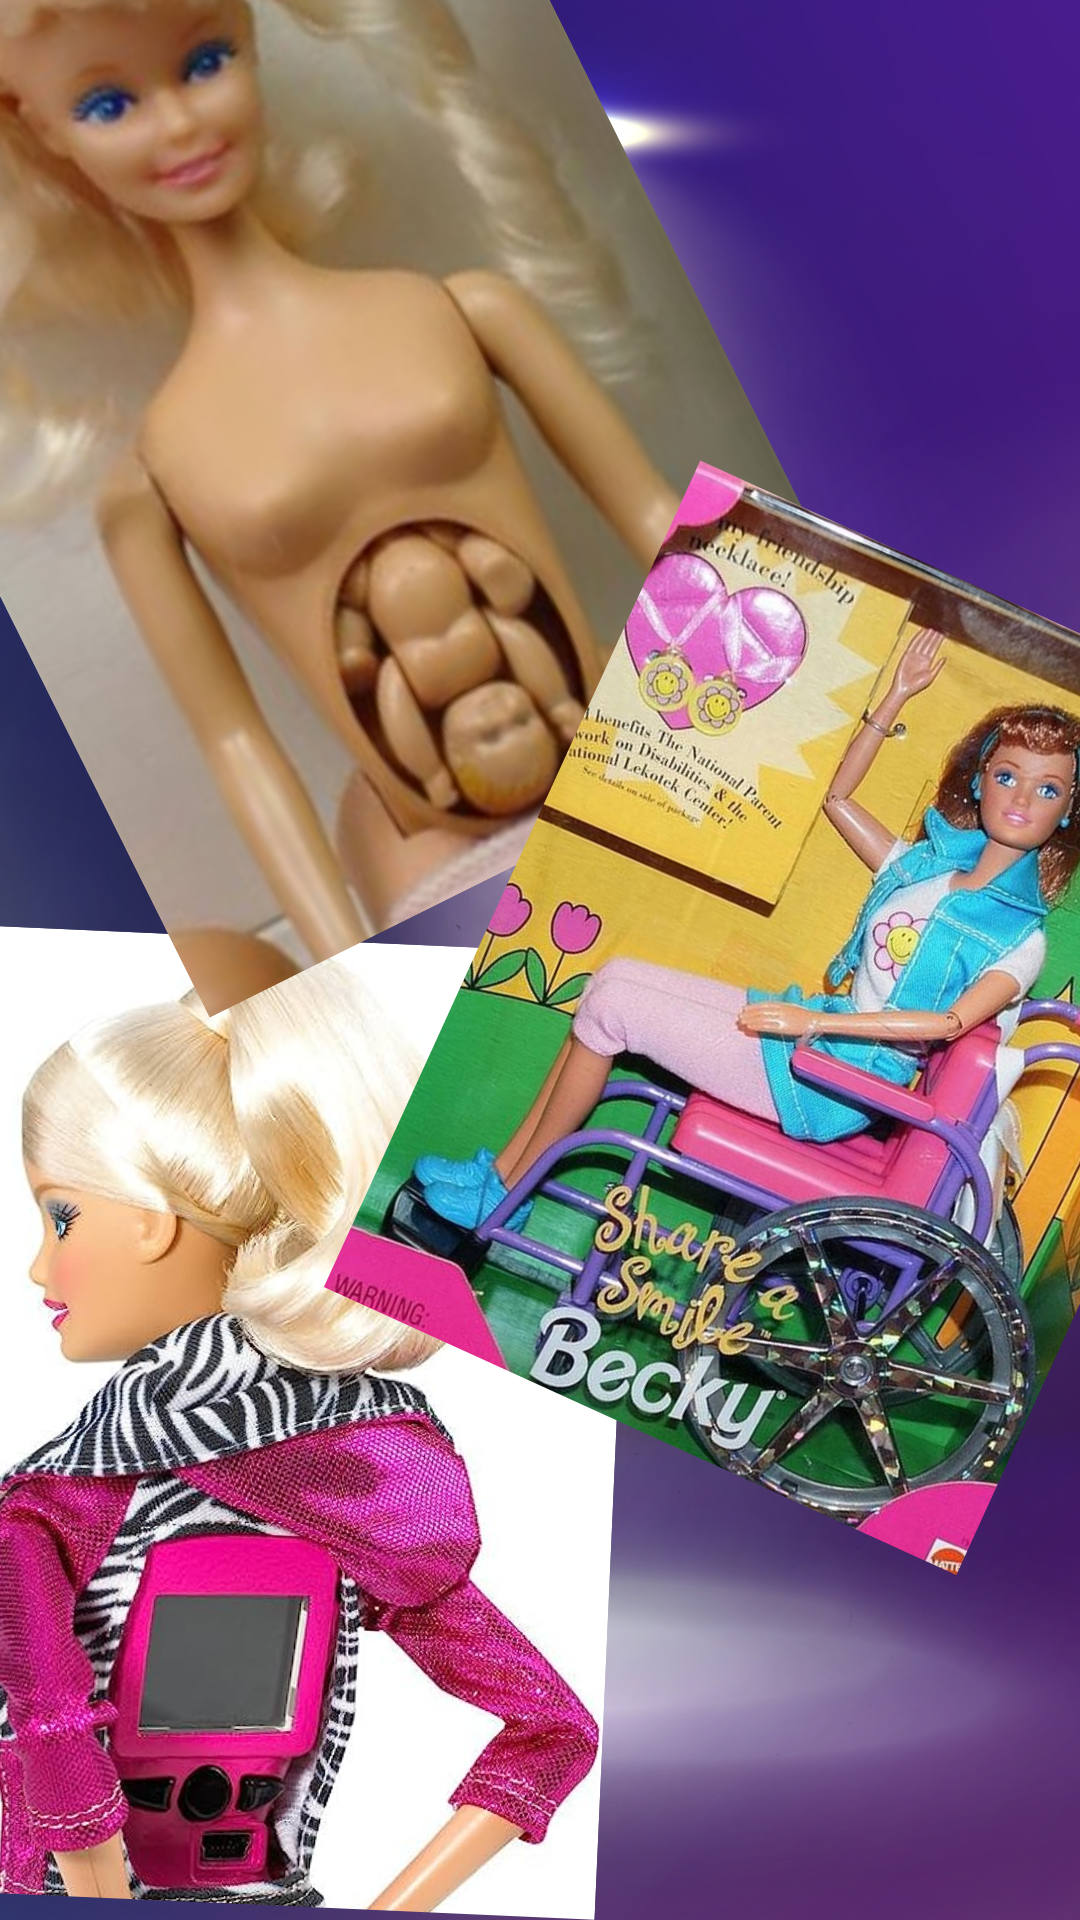 9 controversial Barbie Dolls that were made and recalled